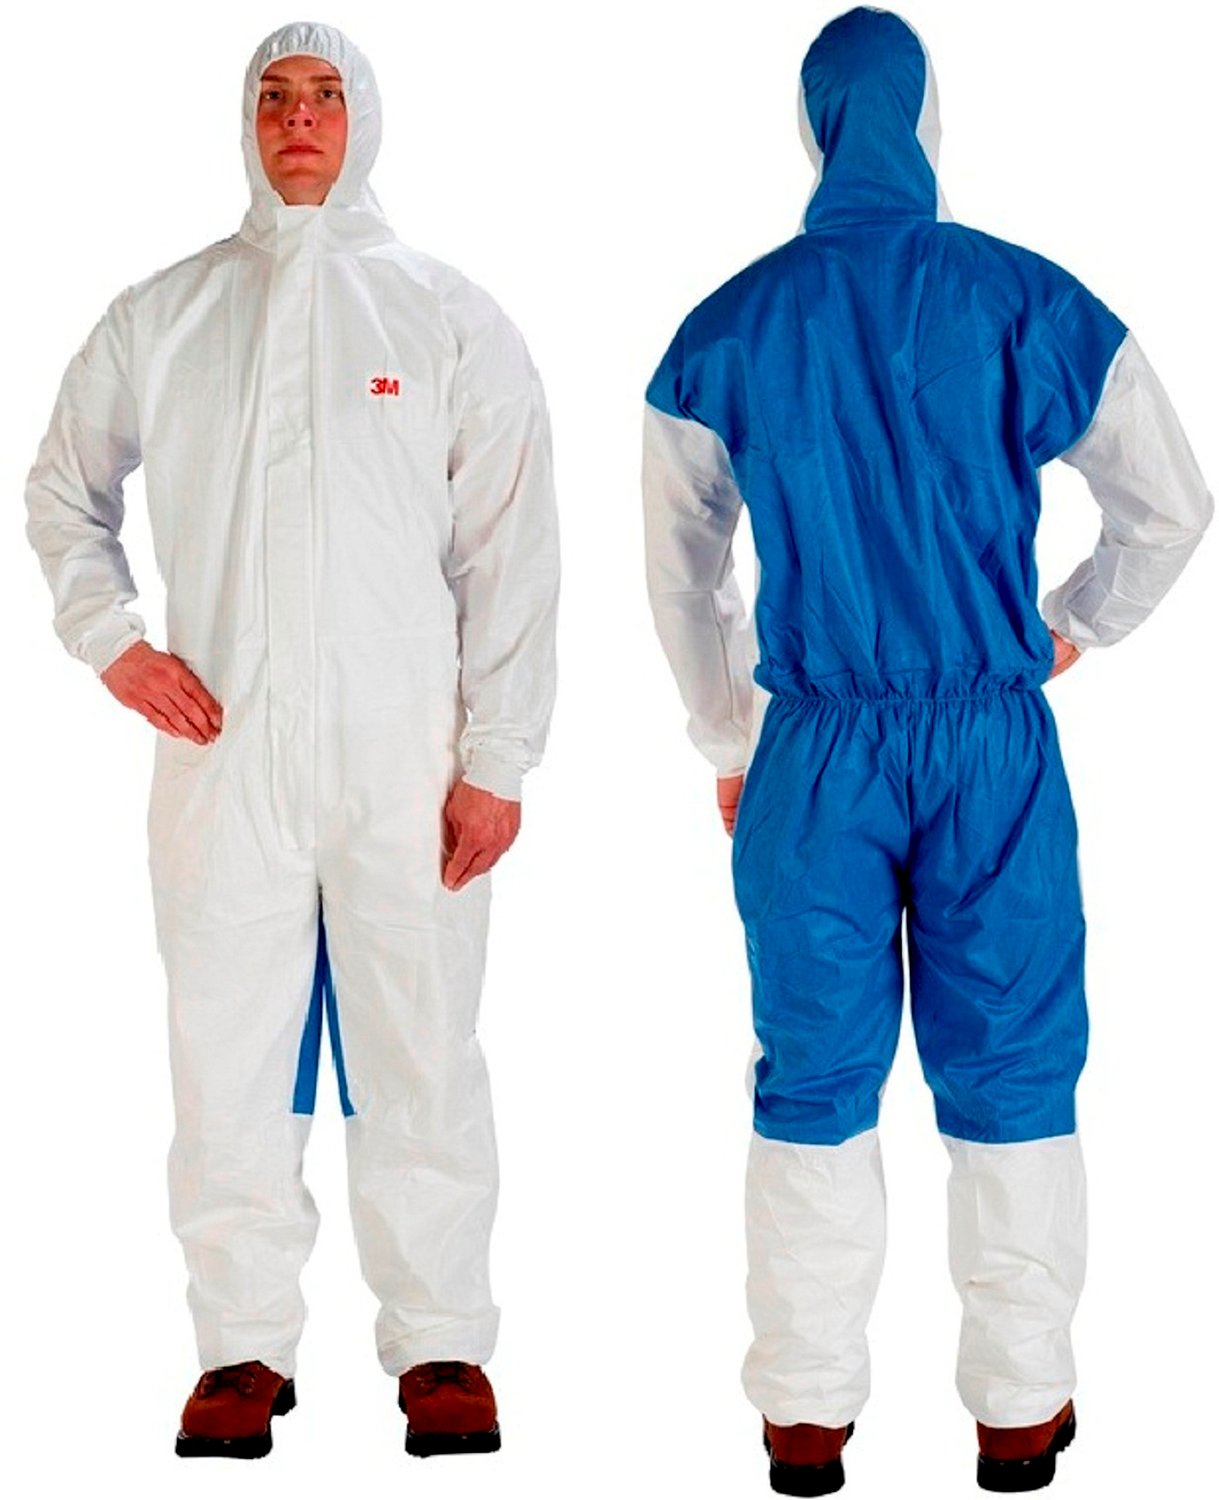 7100216850 - 3M Protective Coverall 4535, White & Blue Type 5/6, 3XL, 20 ea/Case